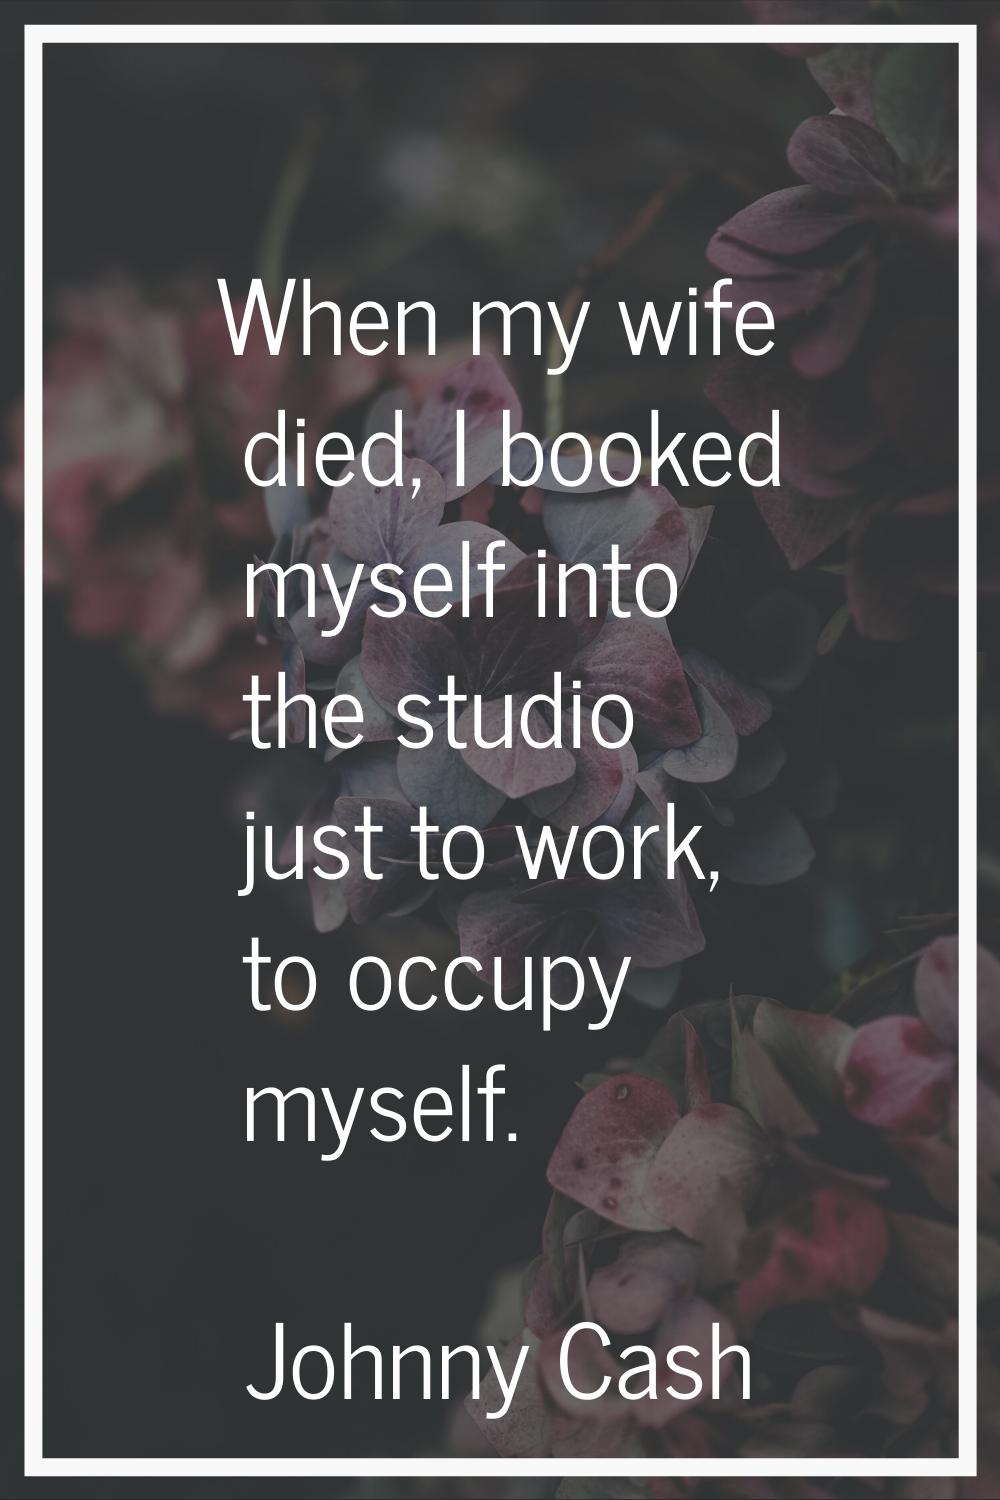 When my wife died, I booked myself into the studio just to work, to occupy myself.